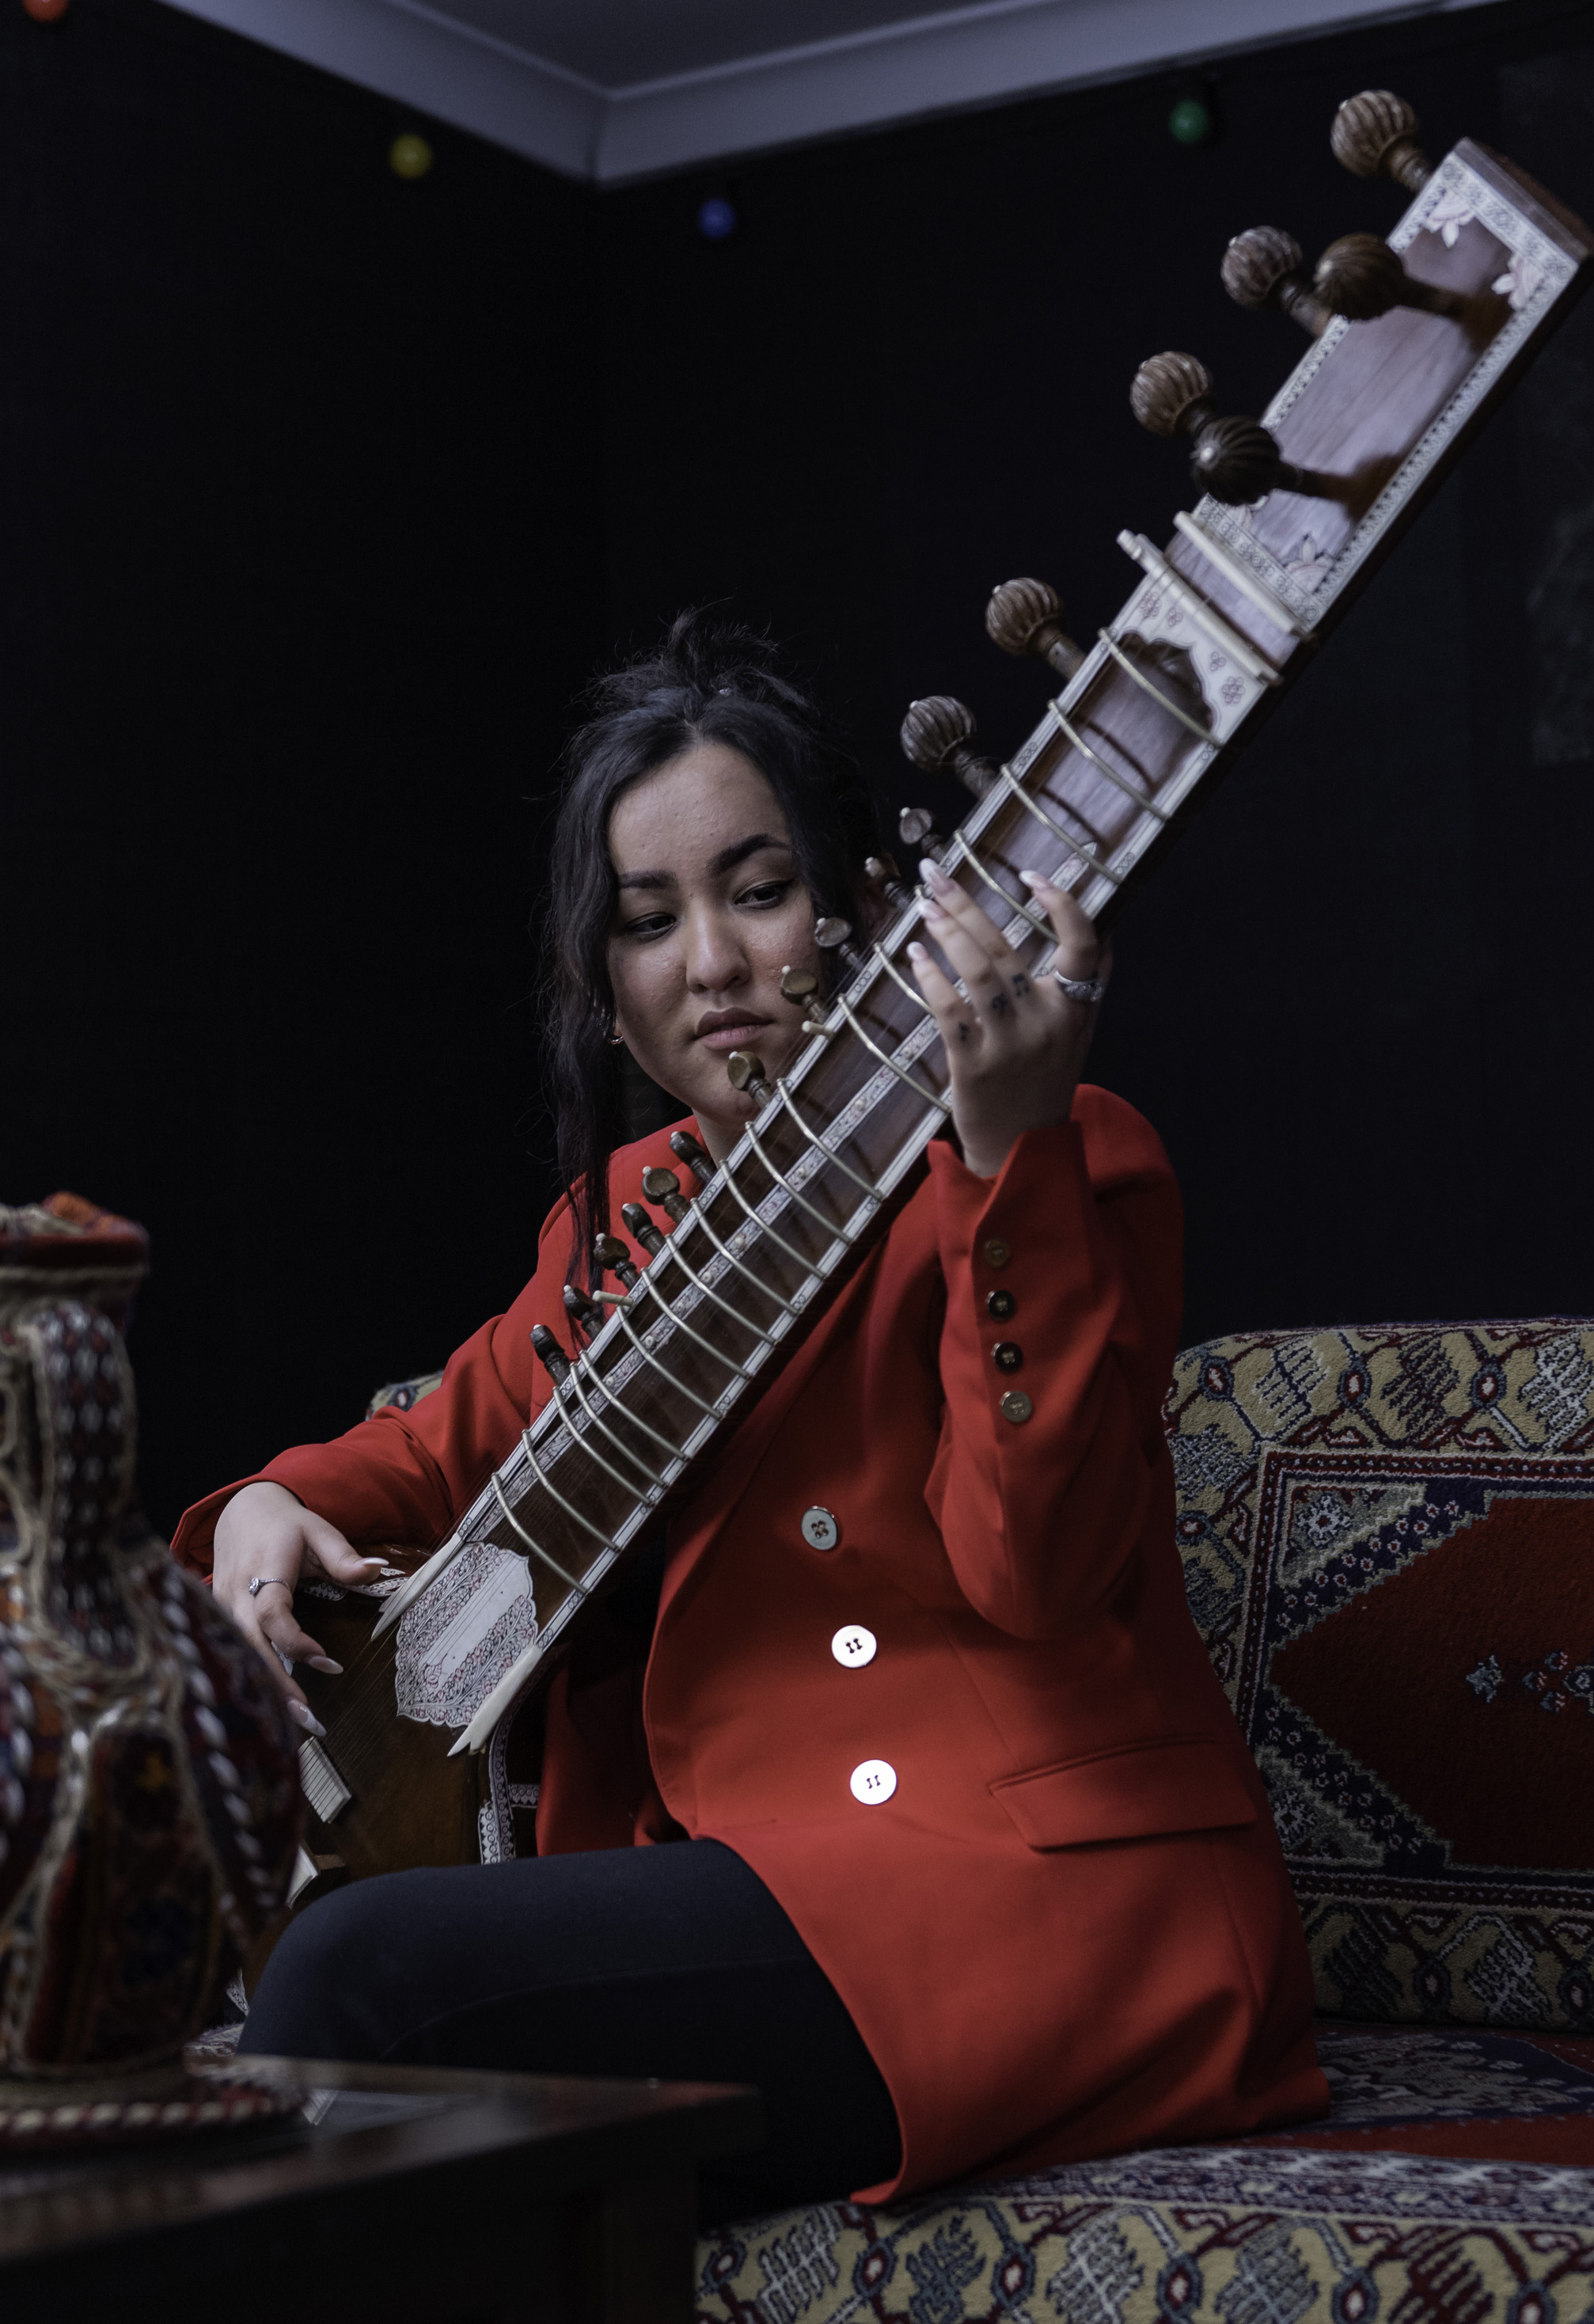 A young Afghan woman in a red jacket plays a sitar that is sitting in her lap